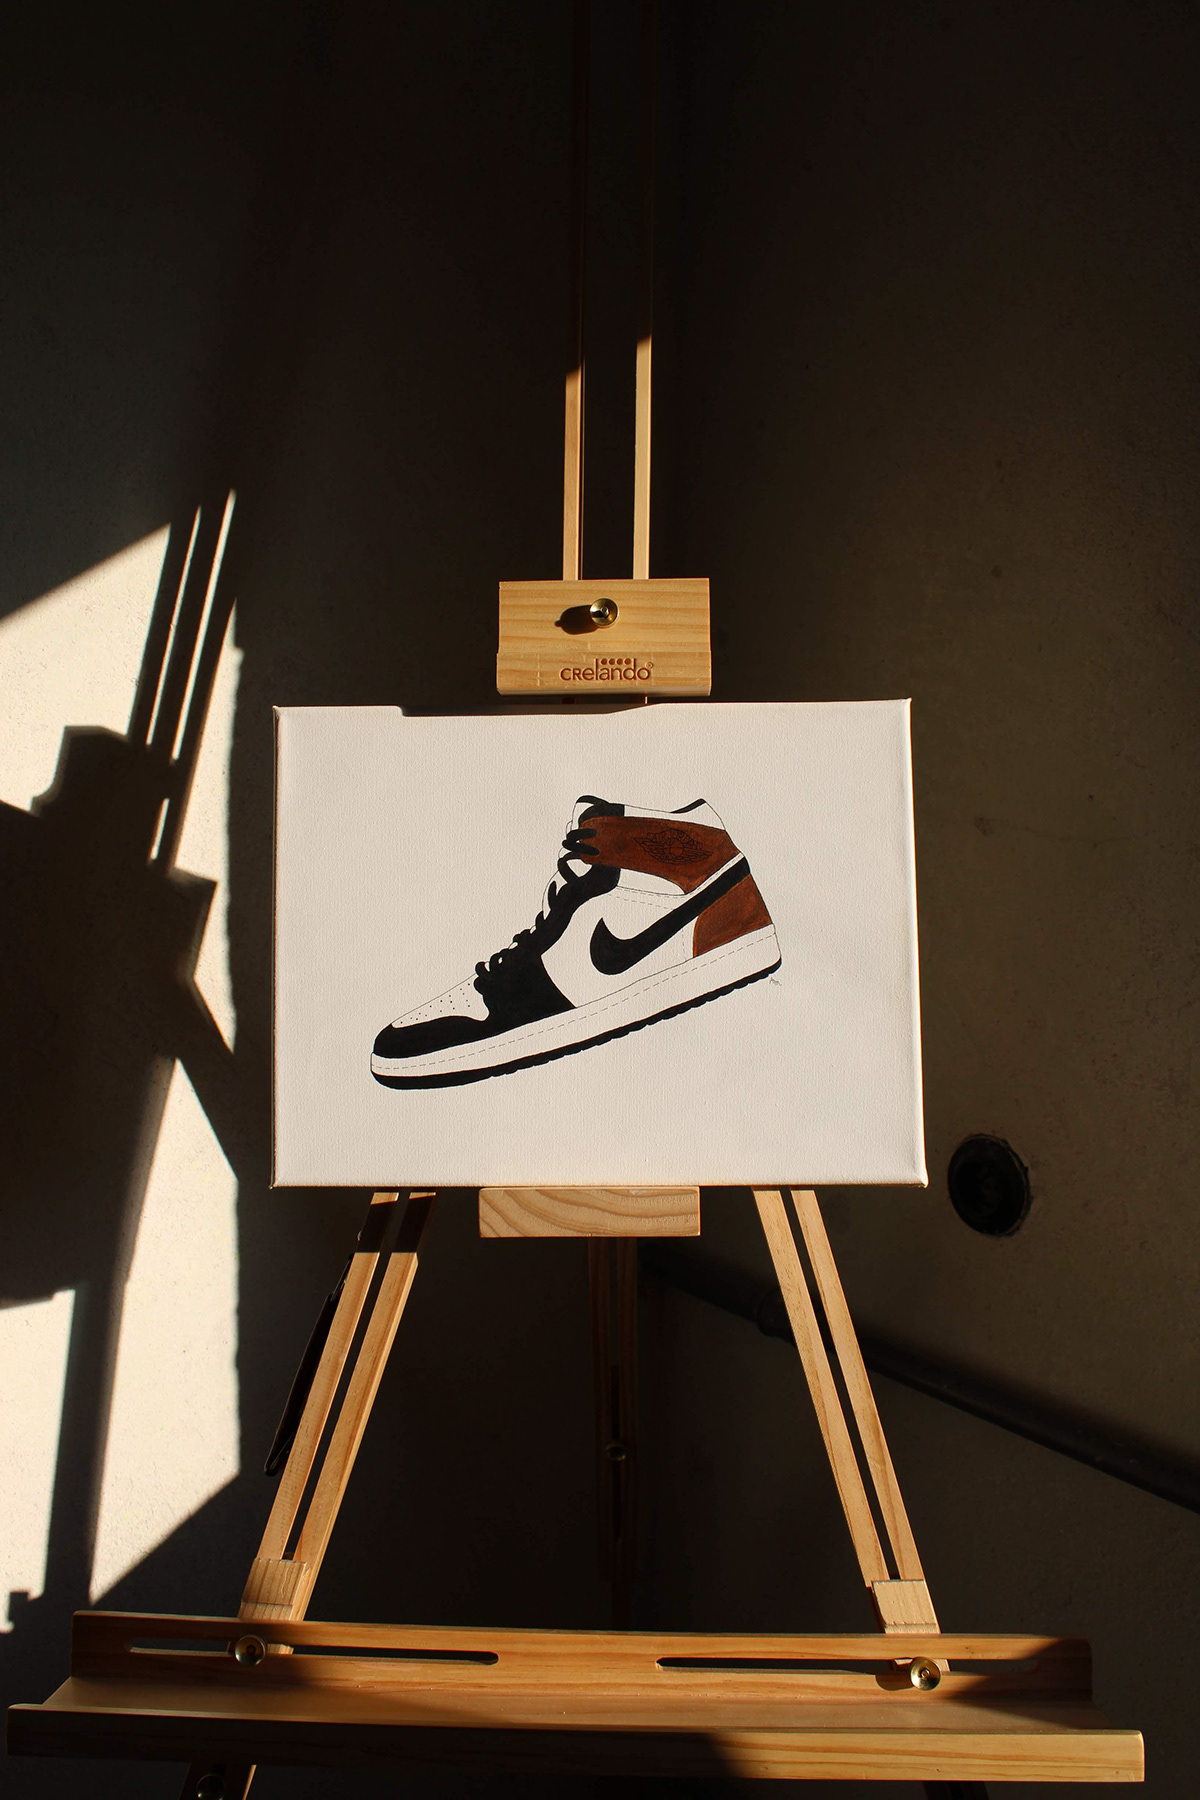 painting   paint acrylic acrylic painting Nike Nike Shoes nike air Photography  sneakers shoes